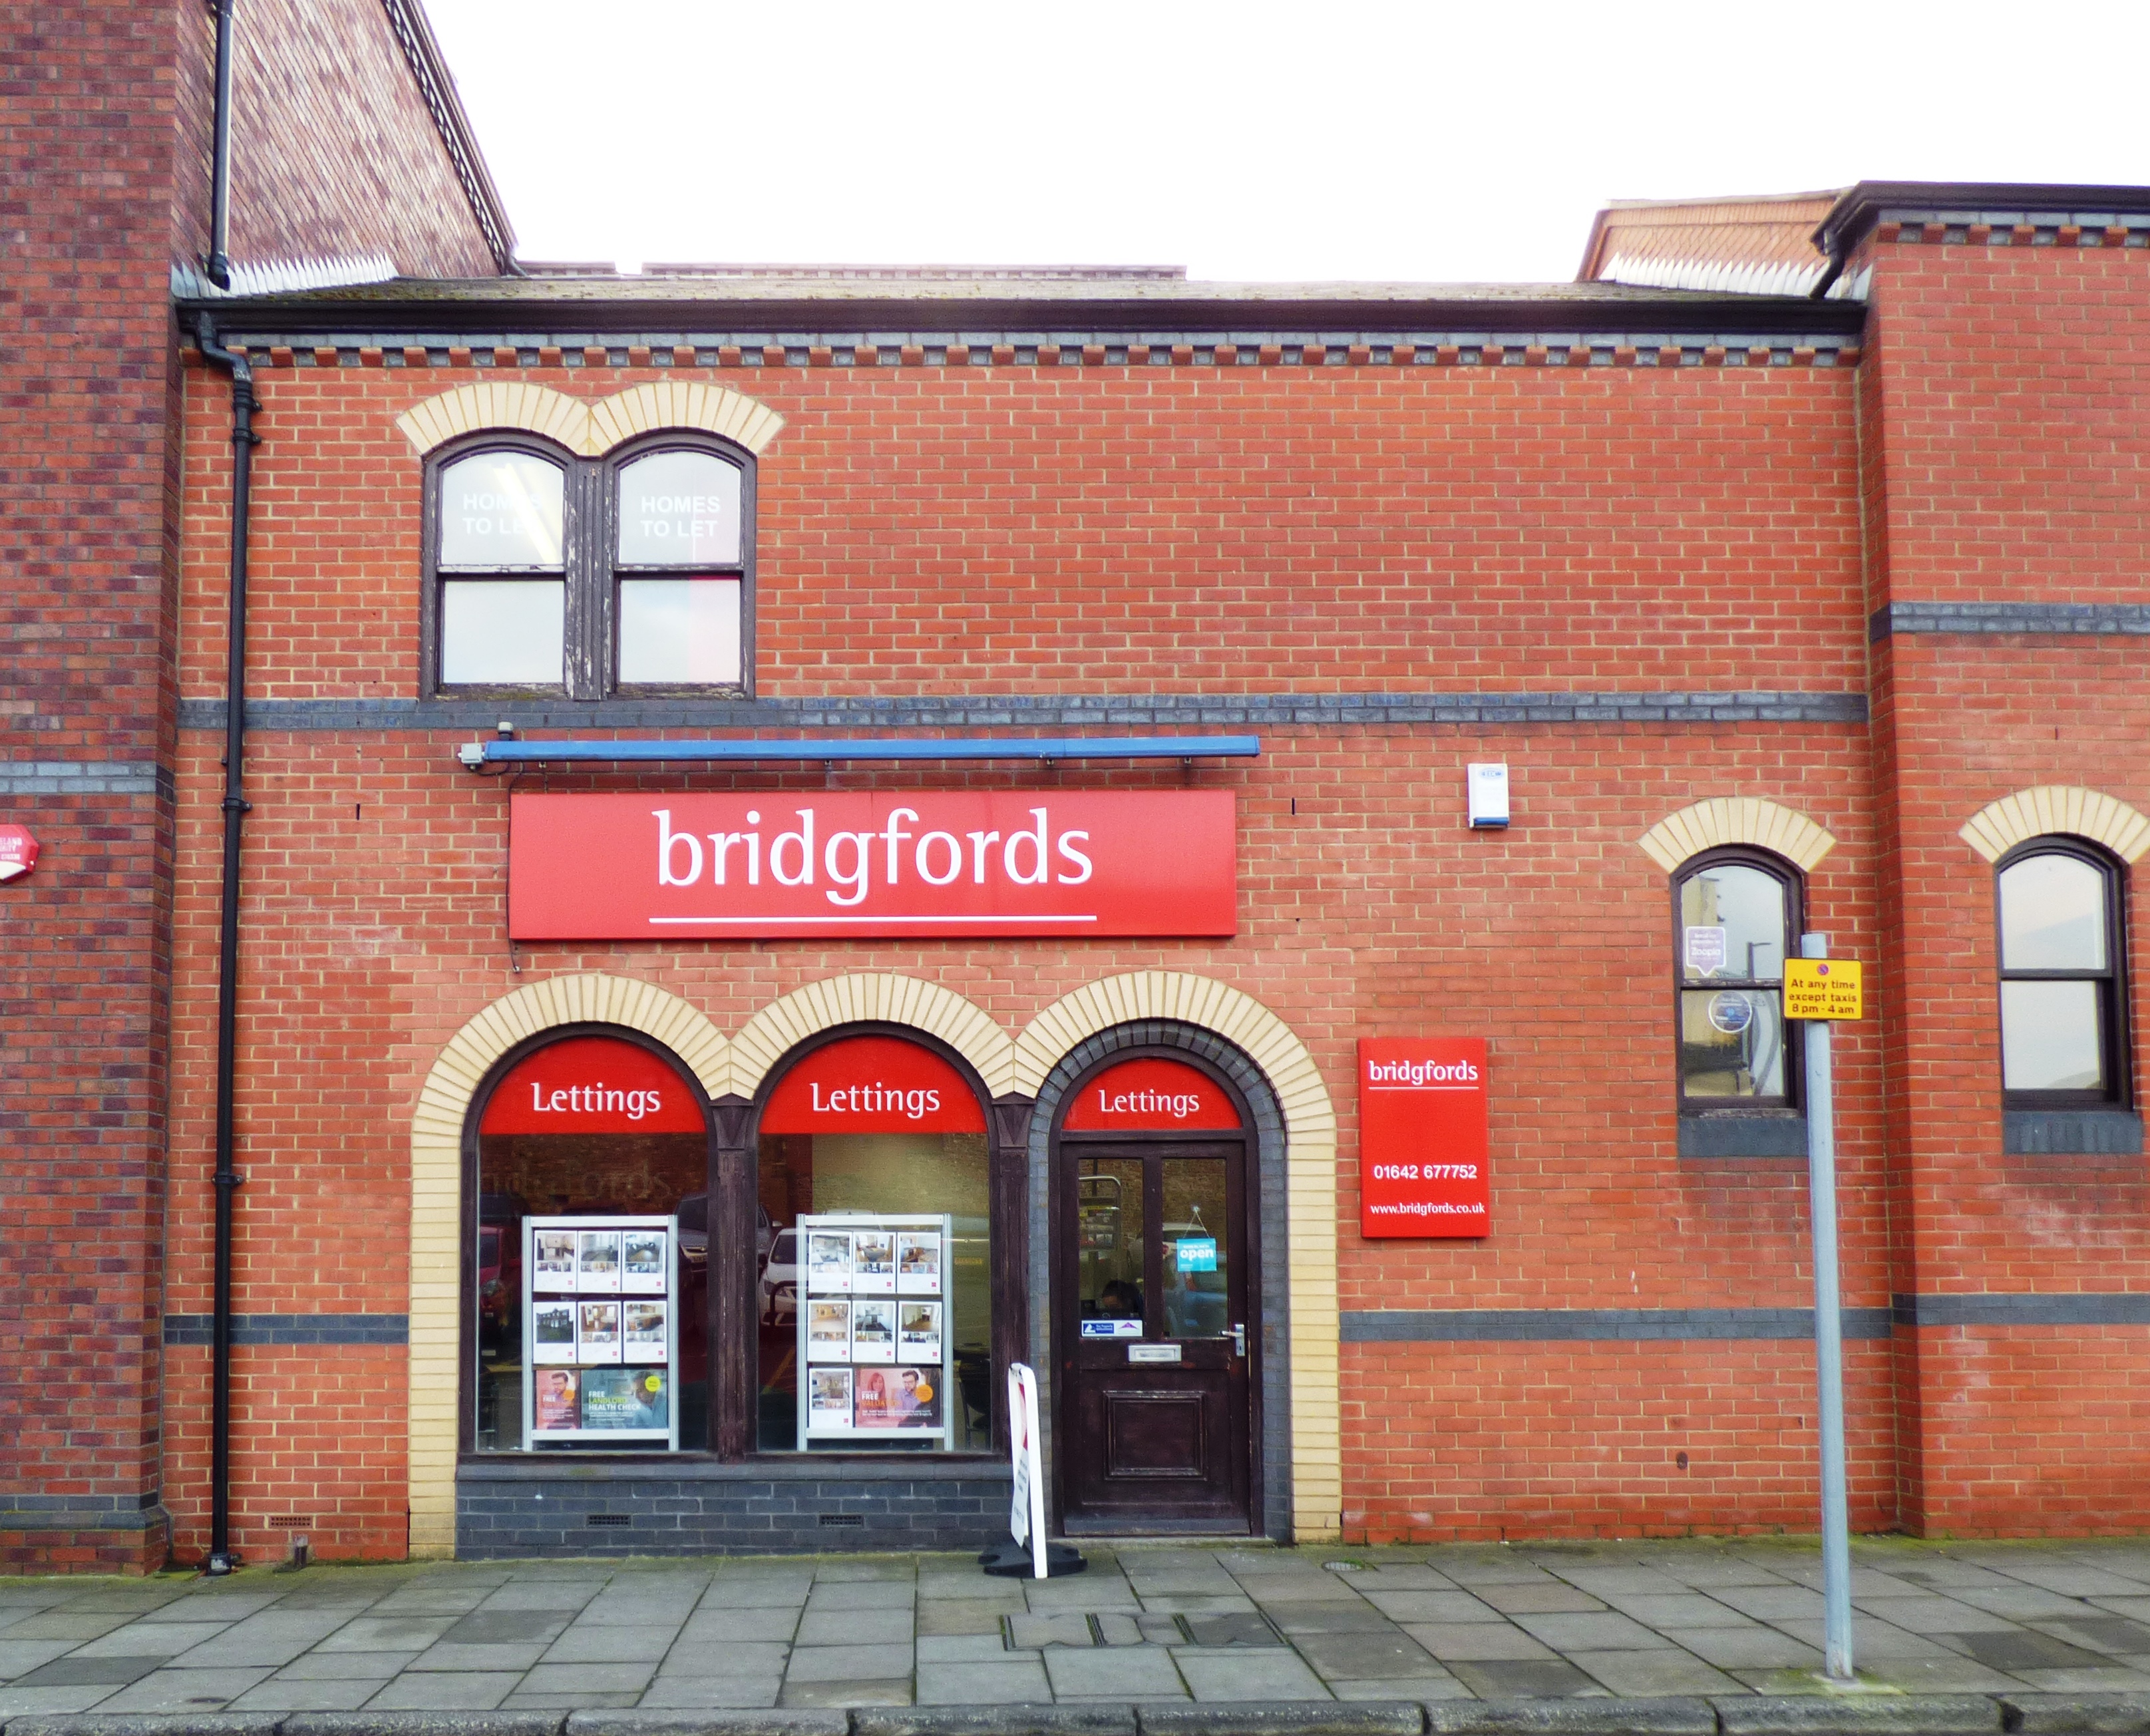 Bridgfords Letting Agents Stockton on Tees Middlesbrough 01642 685269